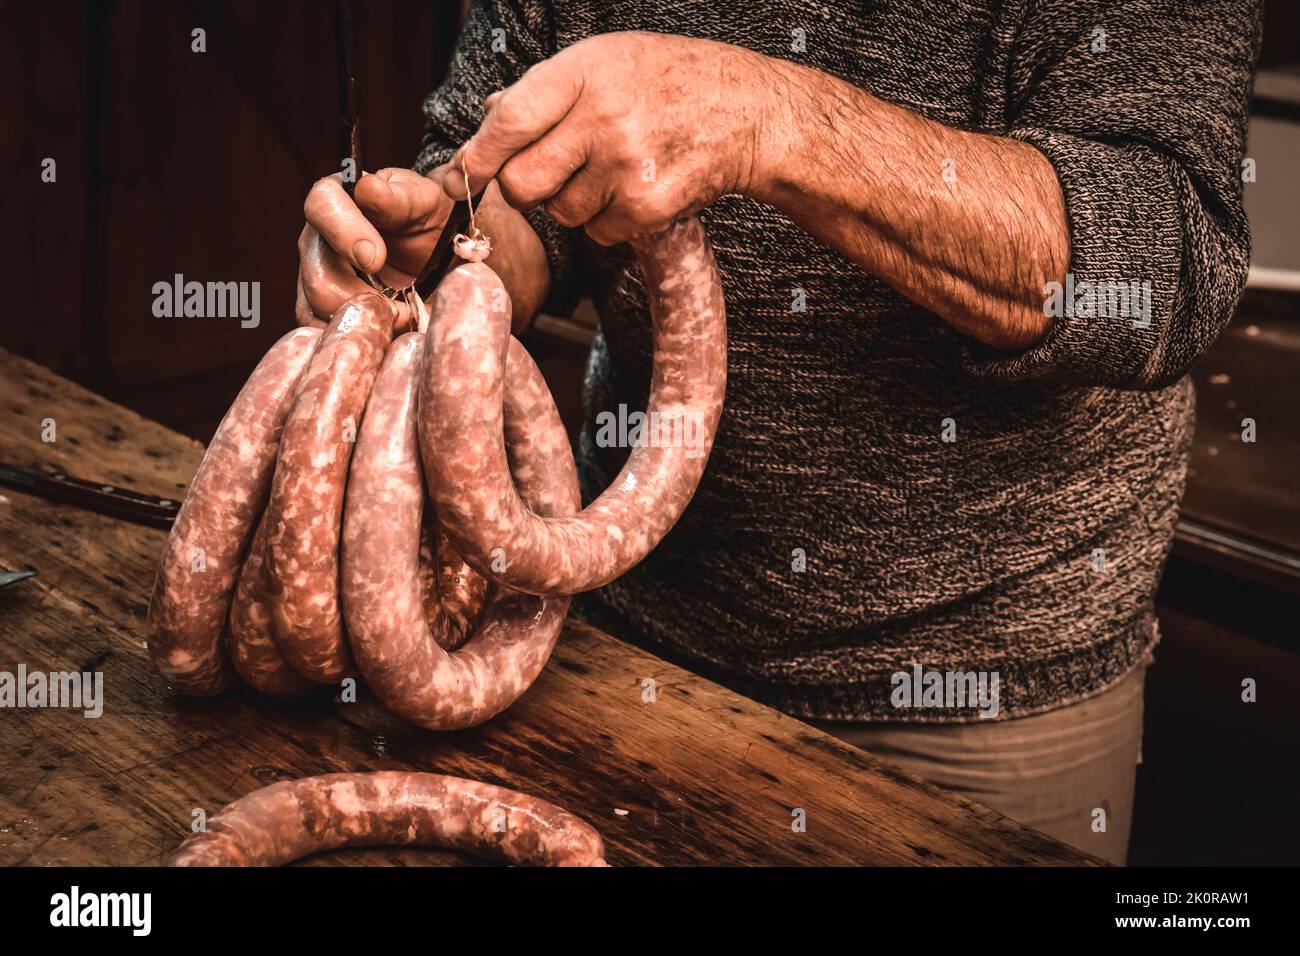 Hands working on the elaboration of sausages, traditional Argentine slaughtering. Stock Photo